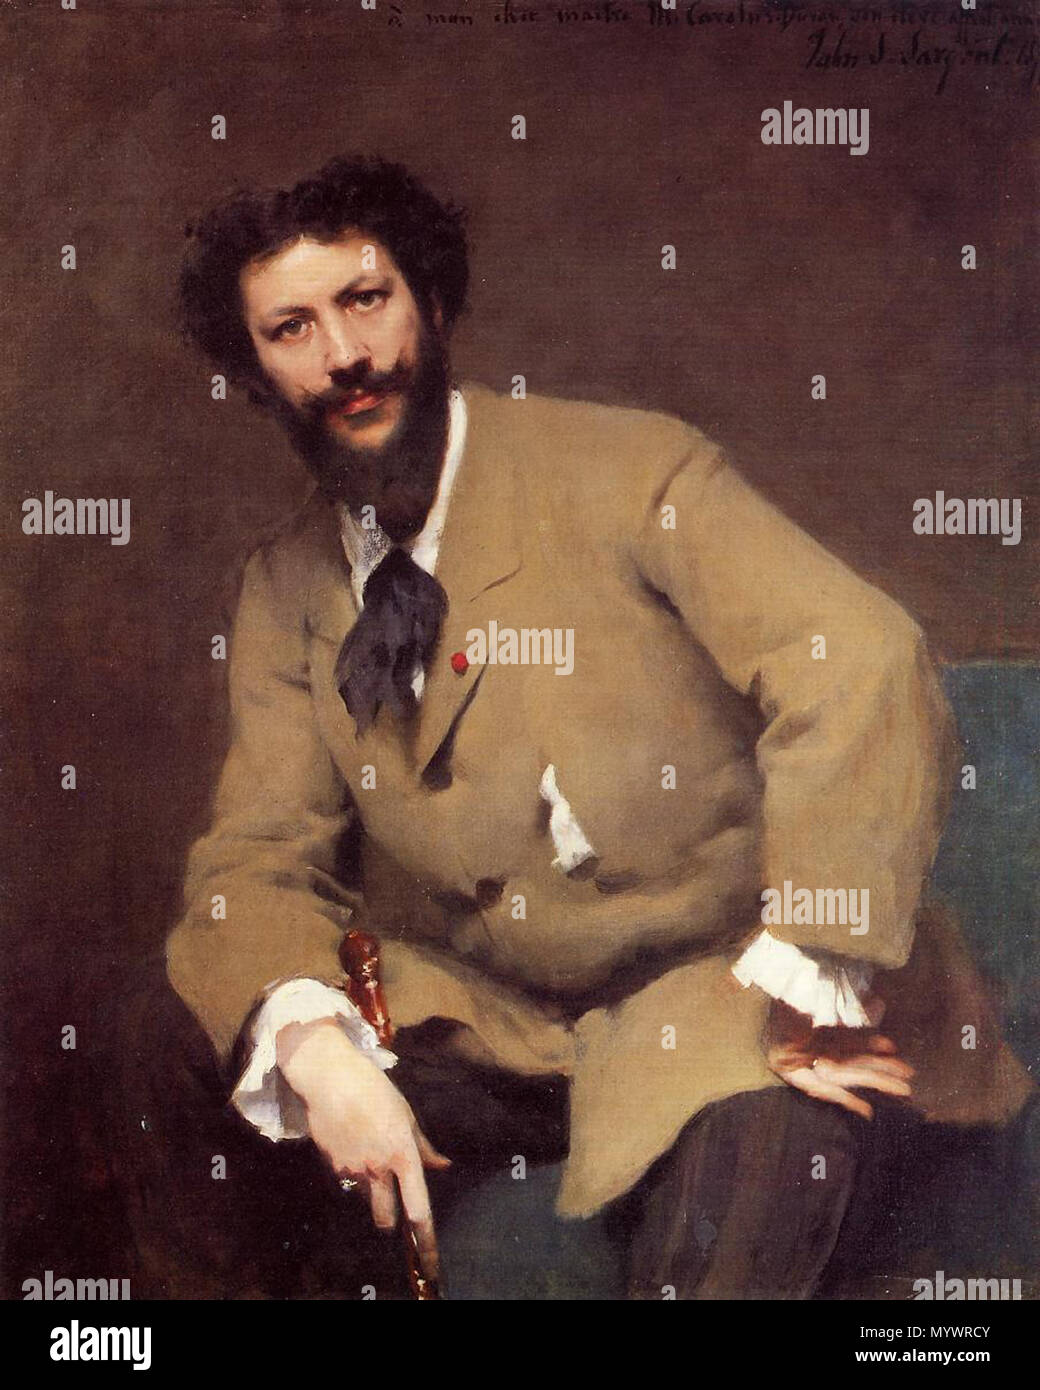 English: 'Portrait of the French painter Charles Auguste Émile Durand  (known as Carolus-Duran), by the American artist John Singer Sargent. From  the Sterling and Francine Clark Art Institute. Image courtesy of